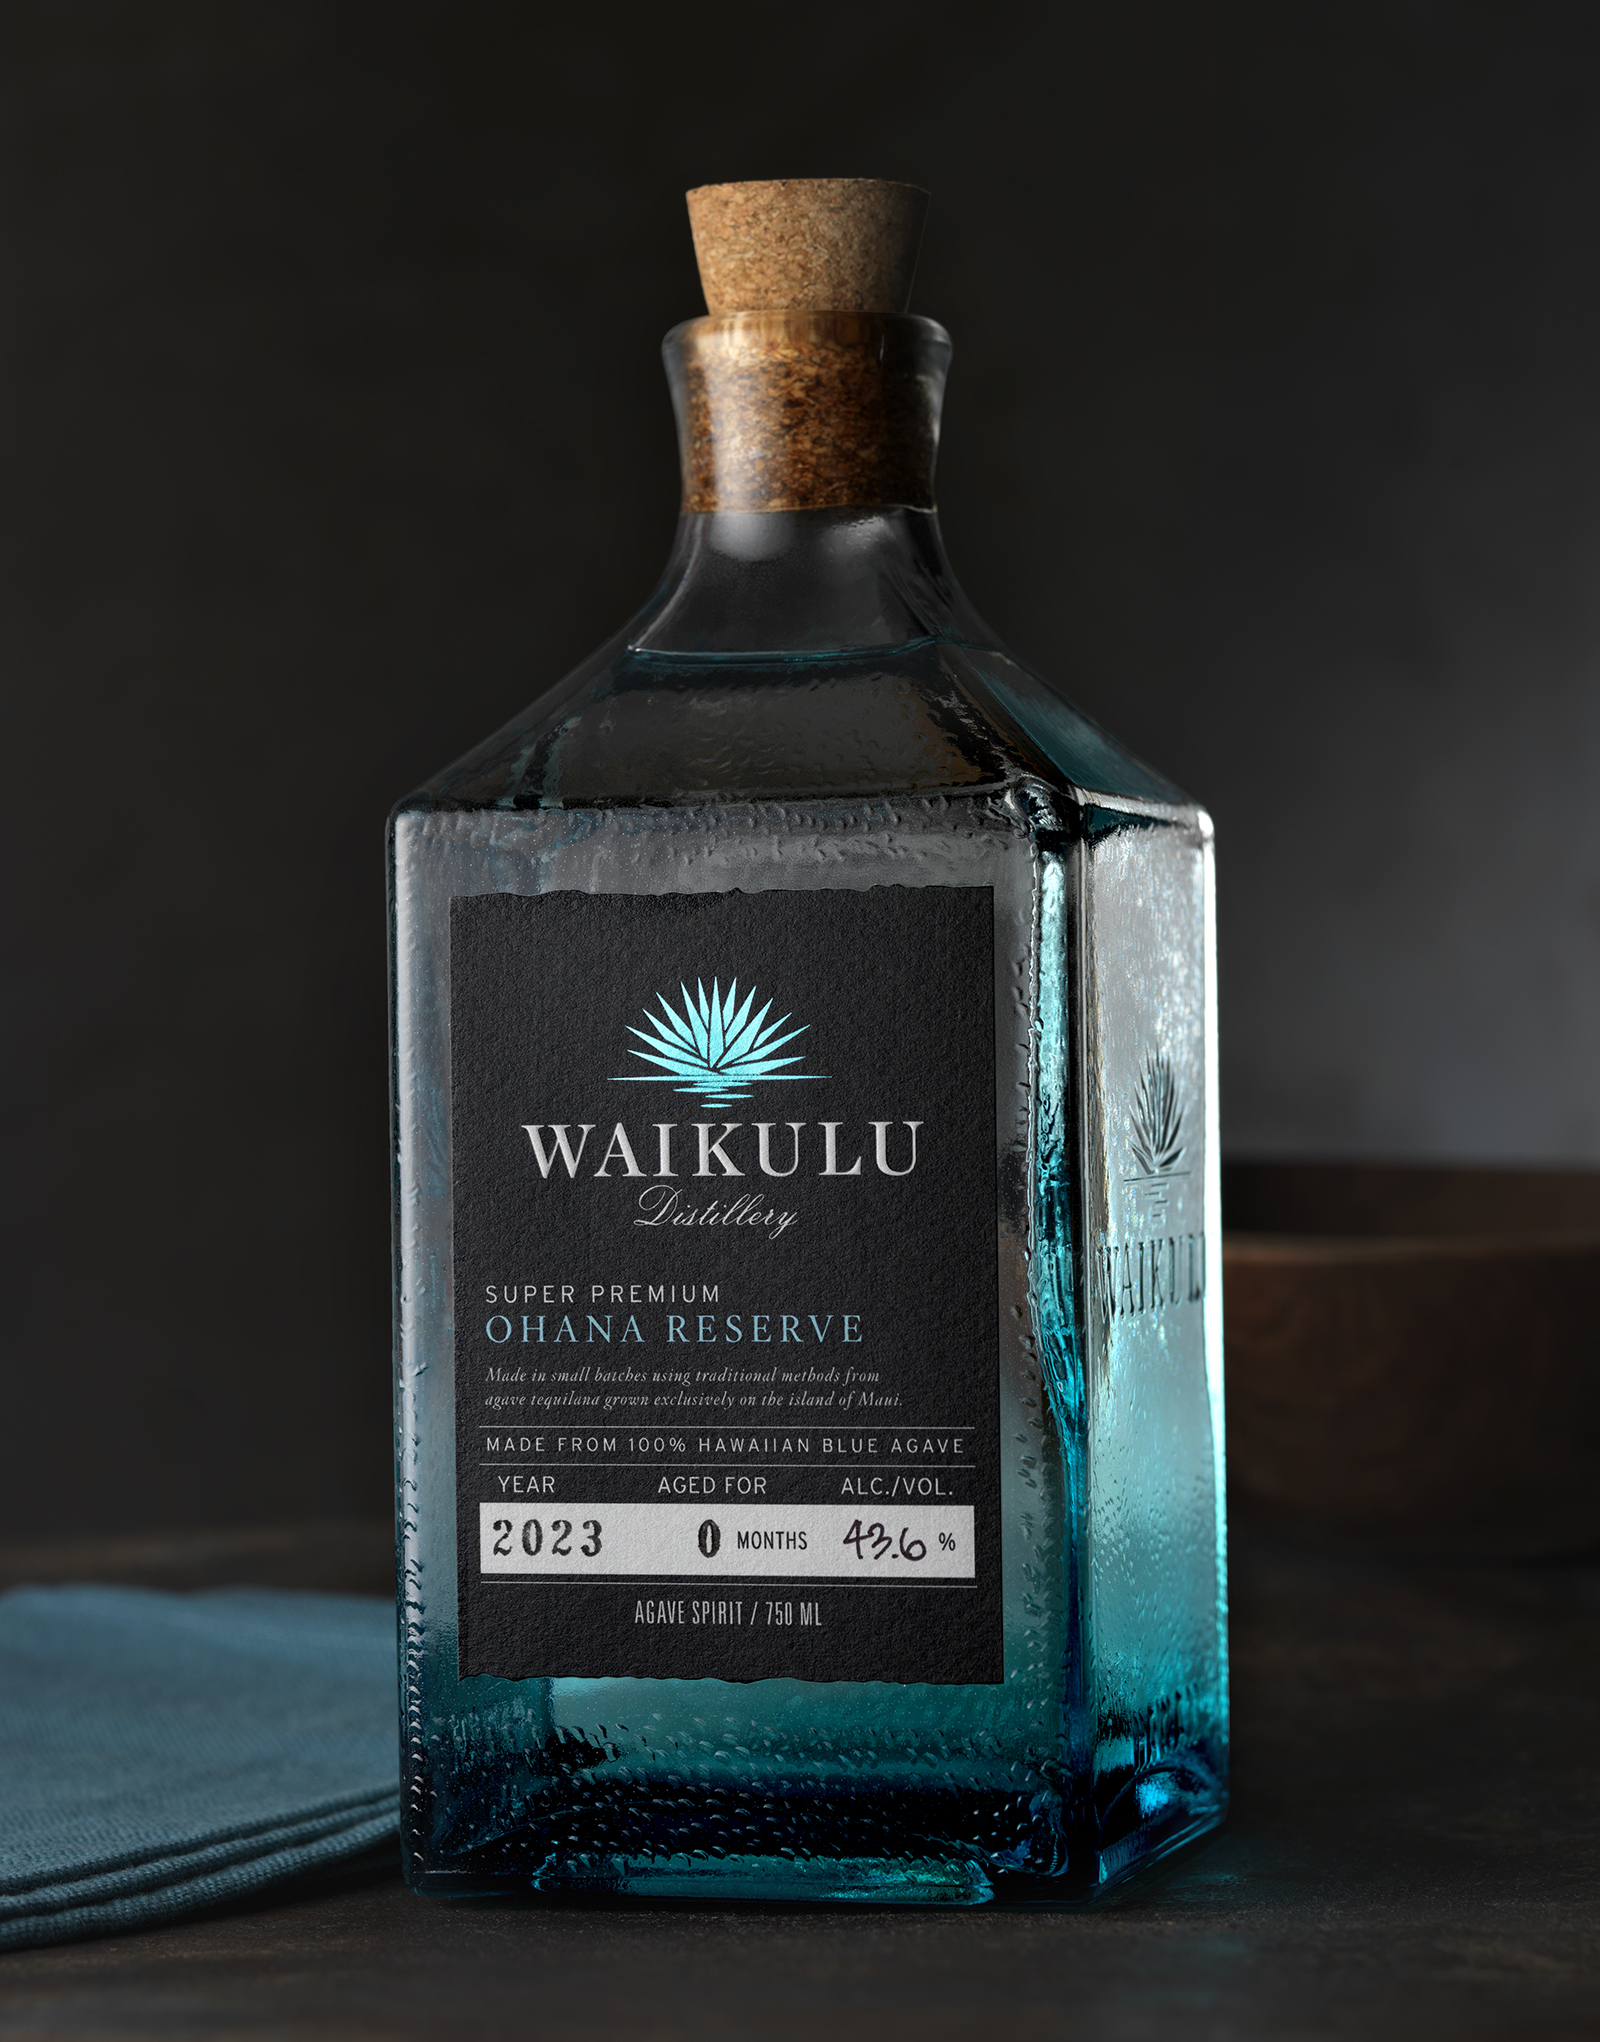 Waikulu Distillery's Unique Agave Spirit Packaging Design: A Blend of Traditional Tequila and Hawaiian Sensibilities